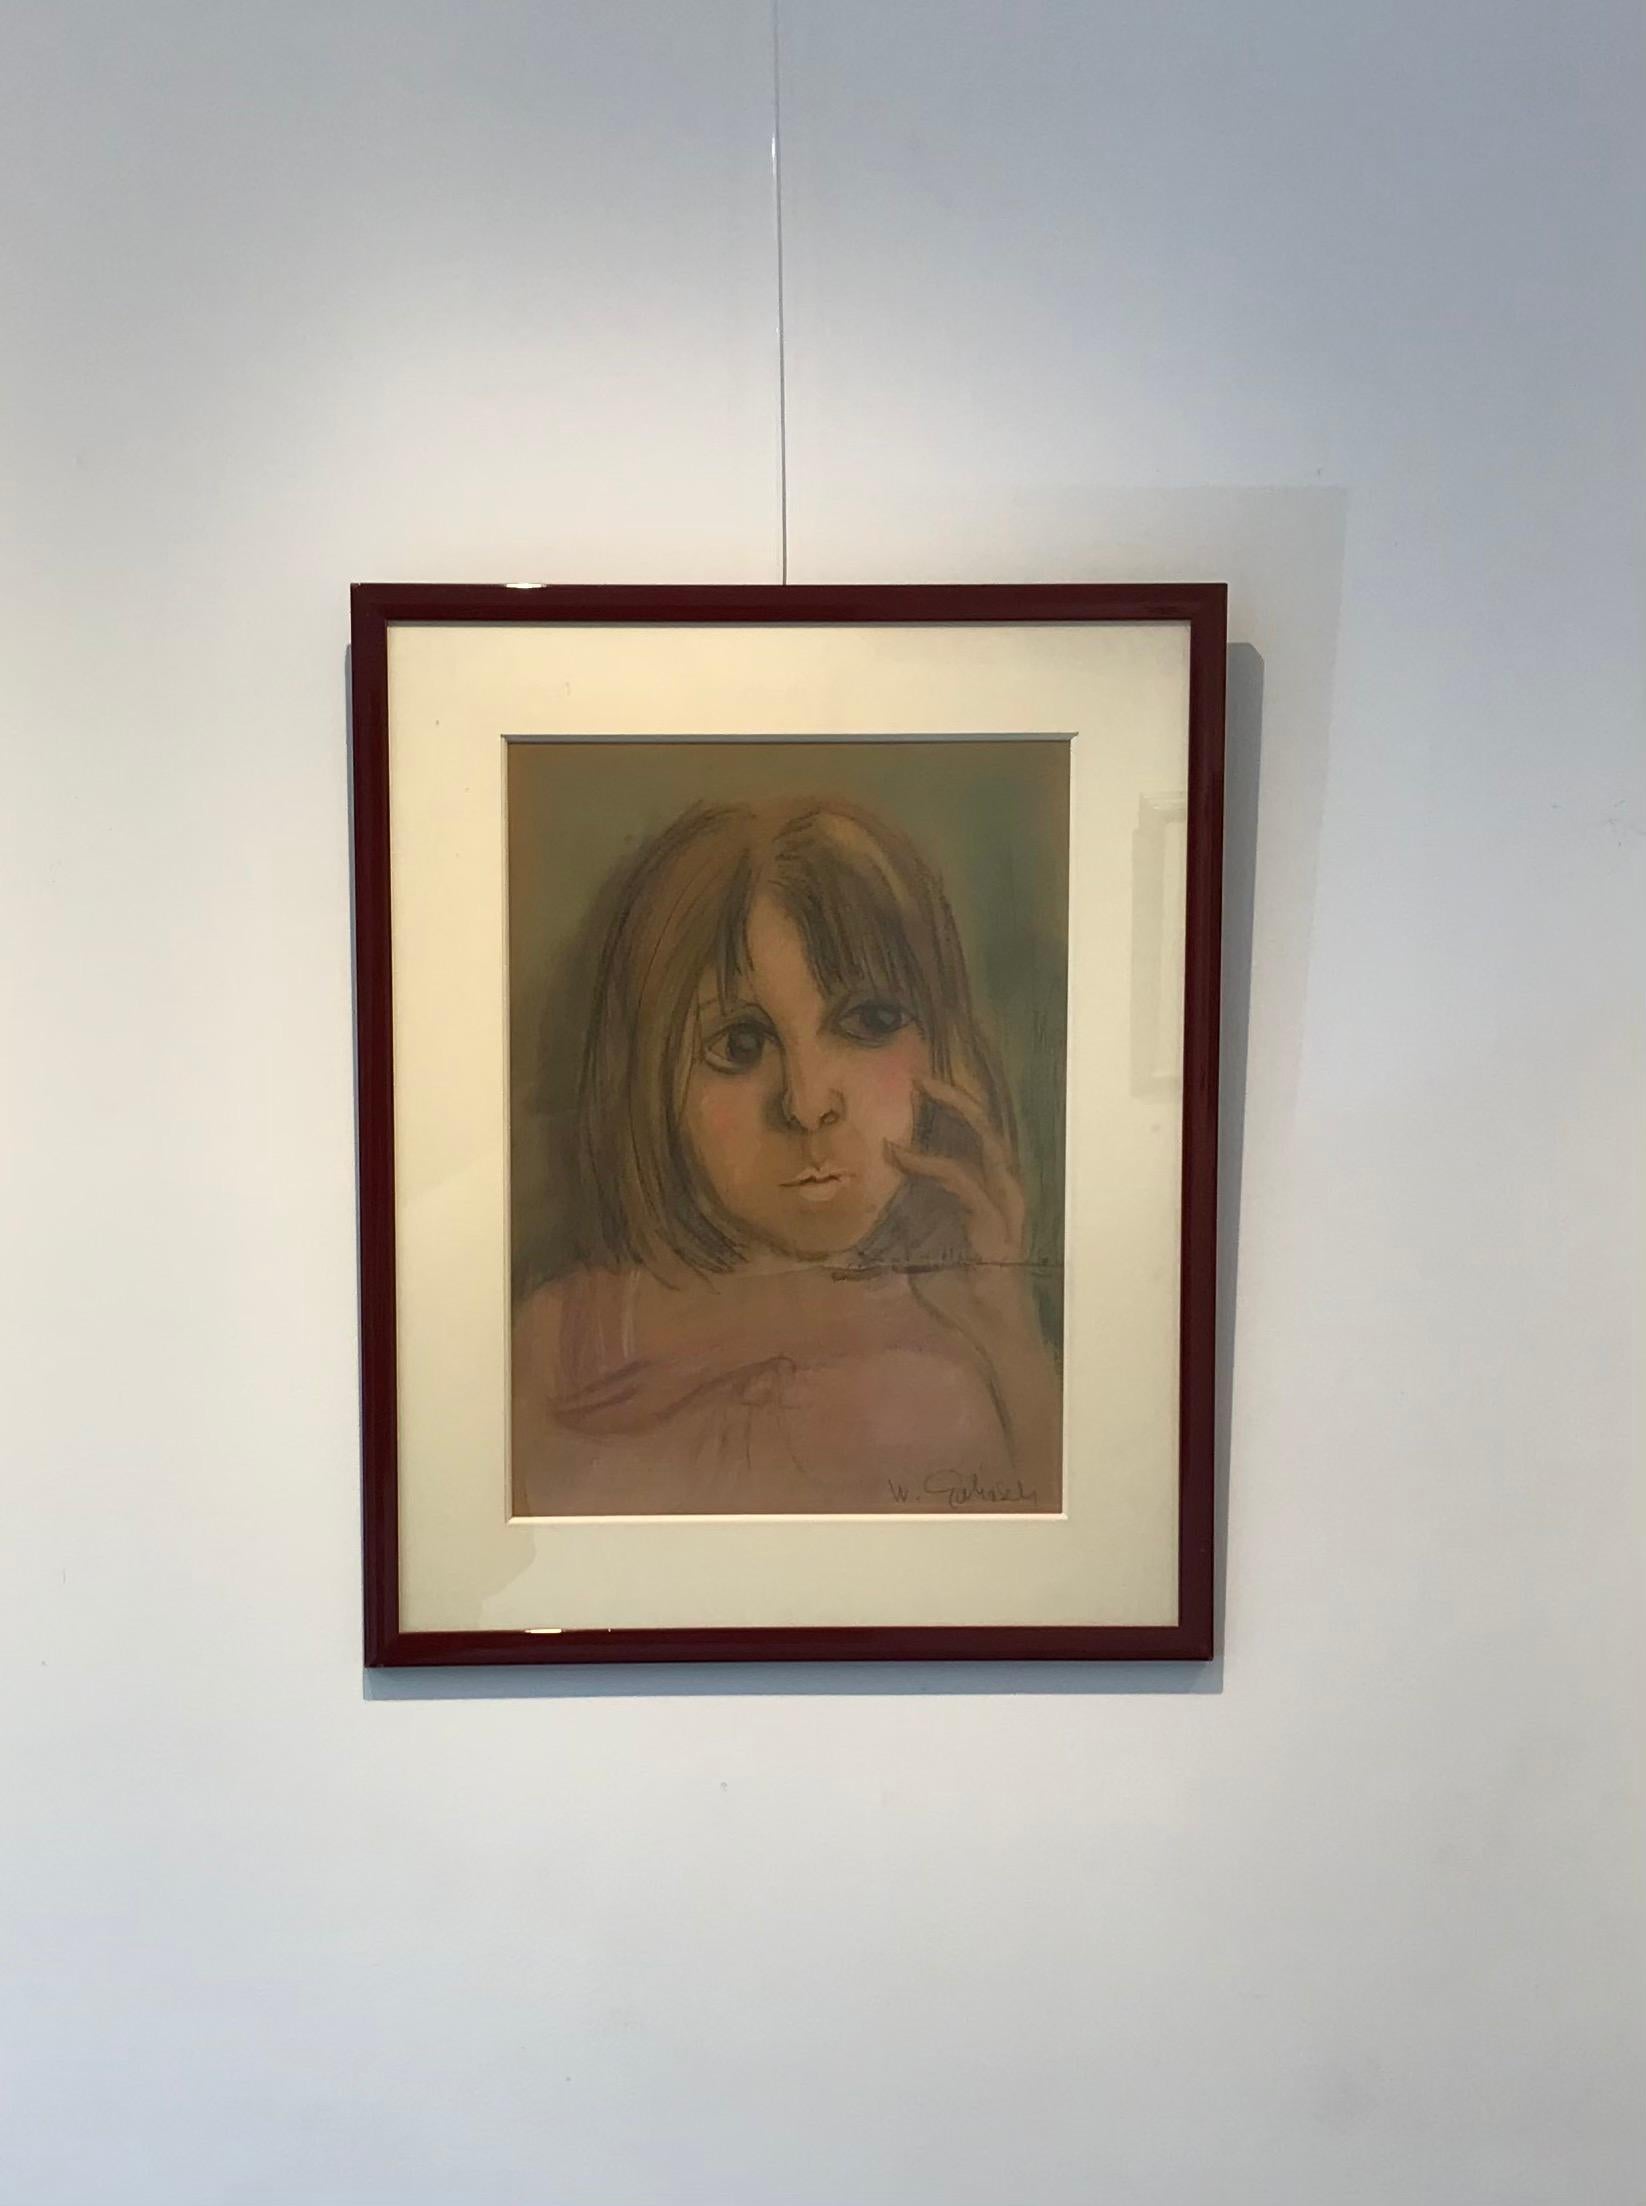 Pensive young woman by William Goliasch - Pastel on paper For Sale 1